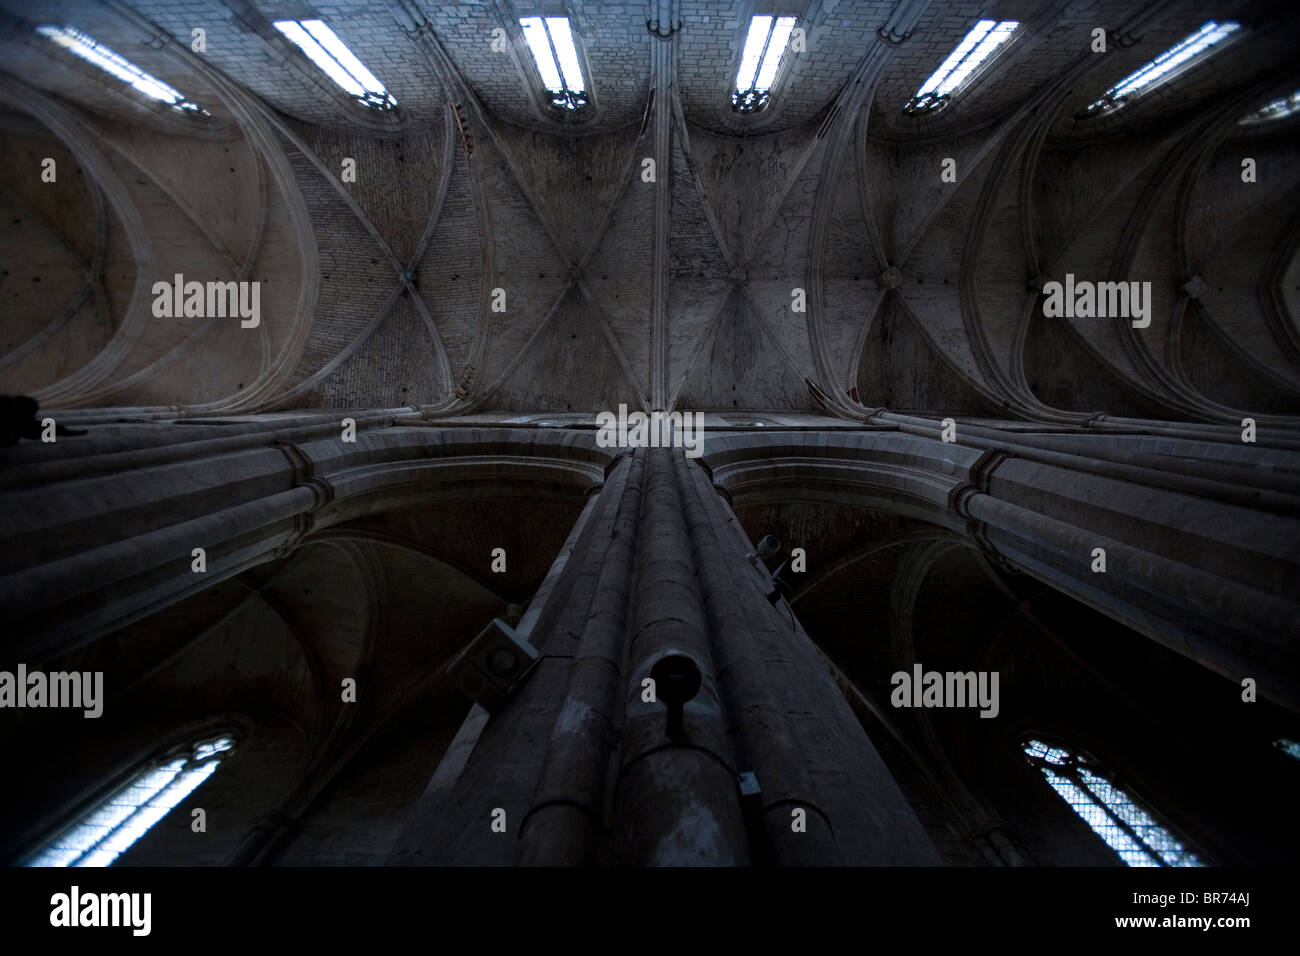 Large arches form a tall celling in Saint Maximin France. Stock Photo